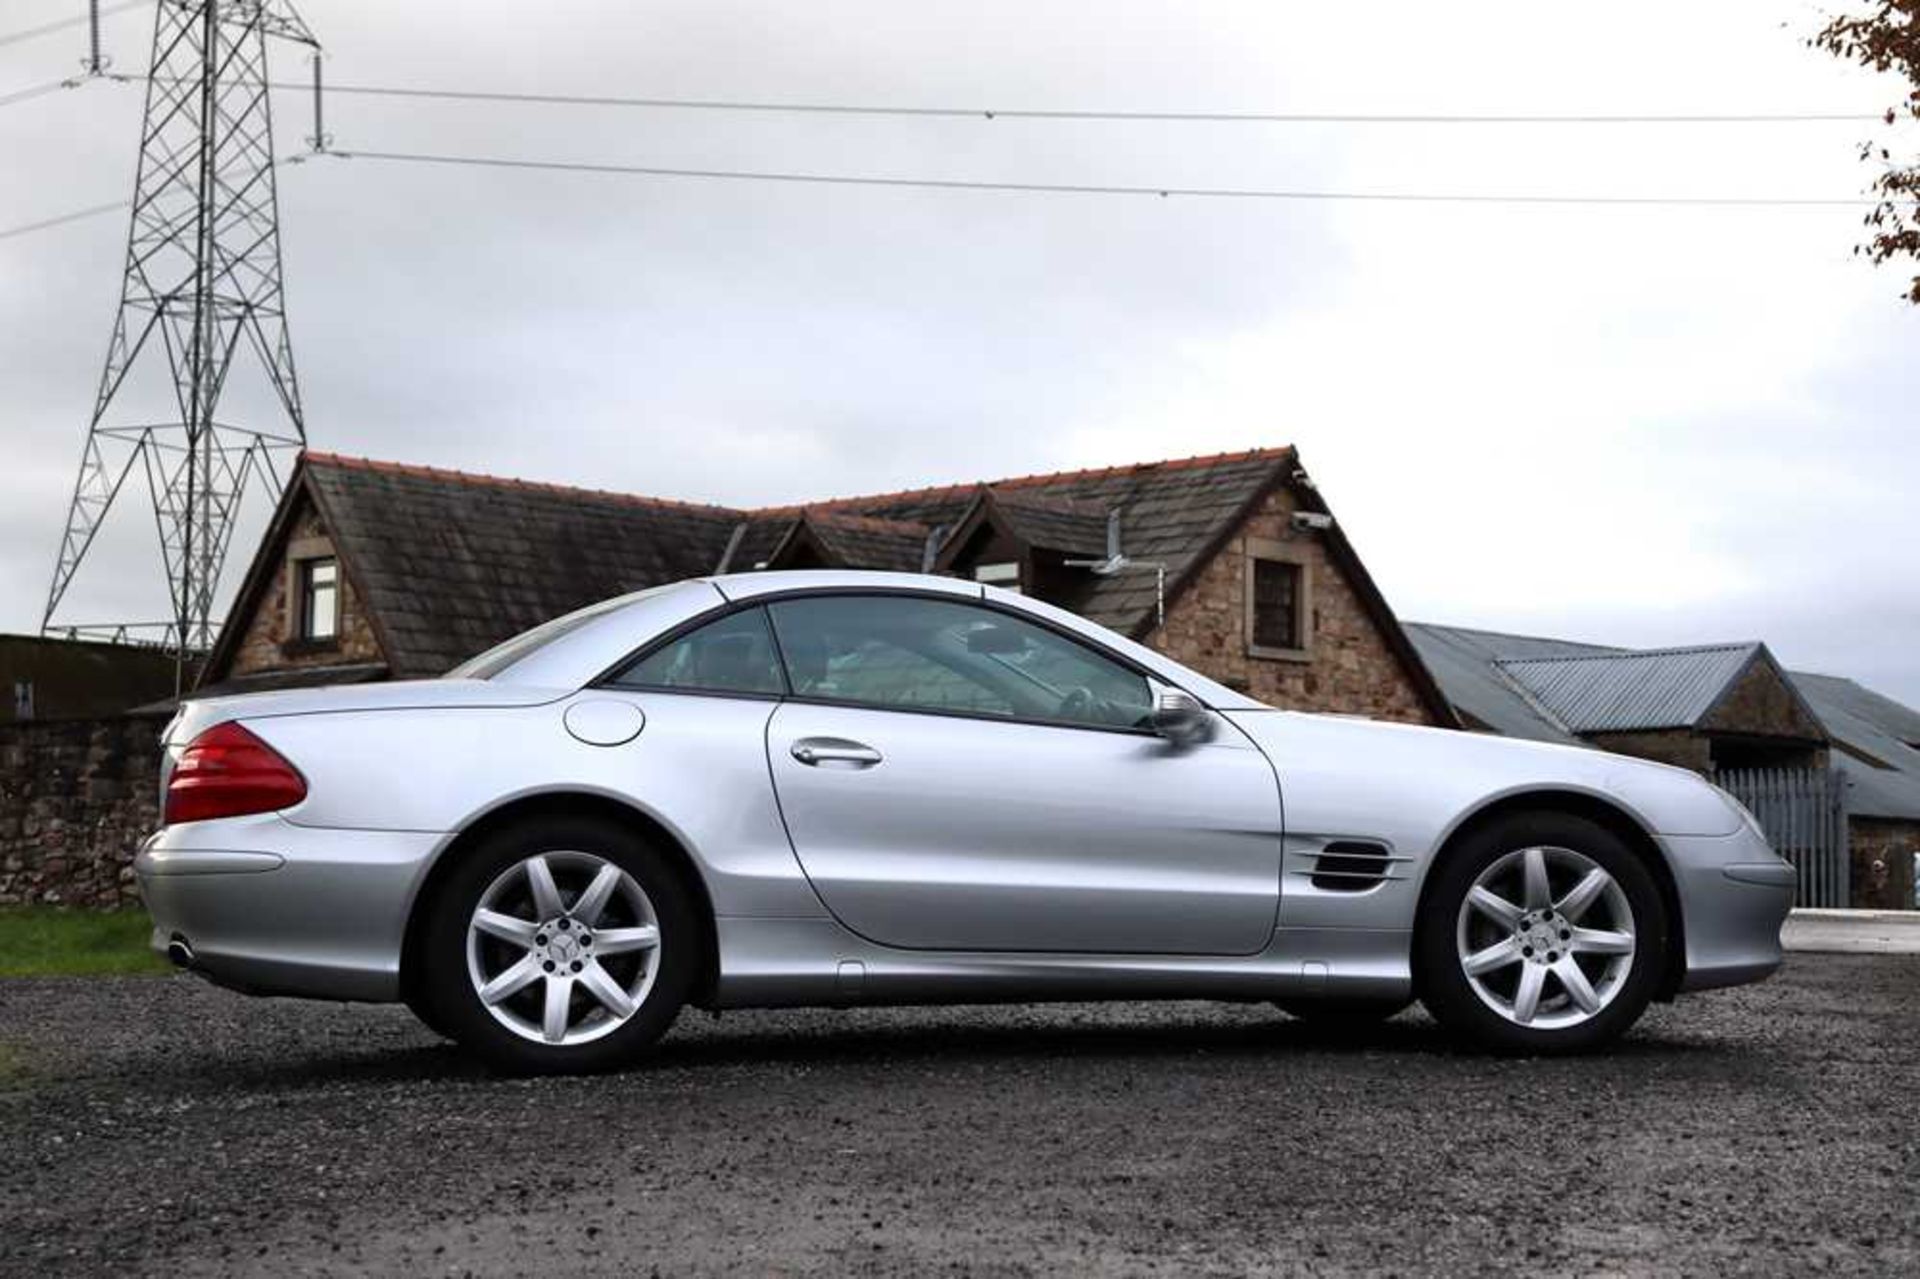 2005 Mercedes-Benz SL 350 Just 34,800 miles from new - Image 10 of 75